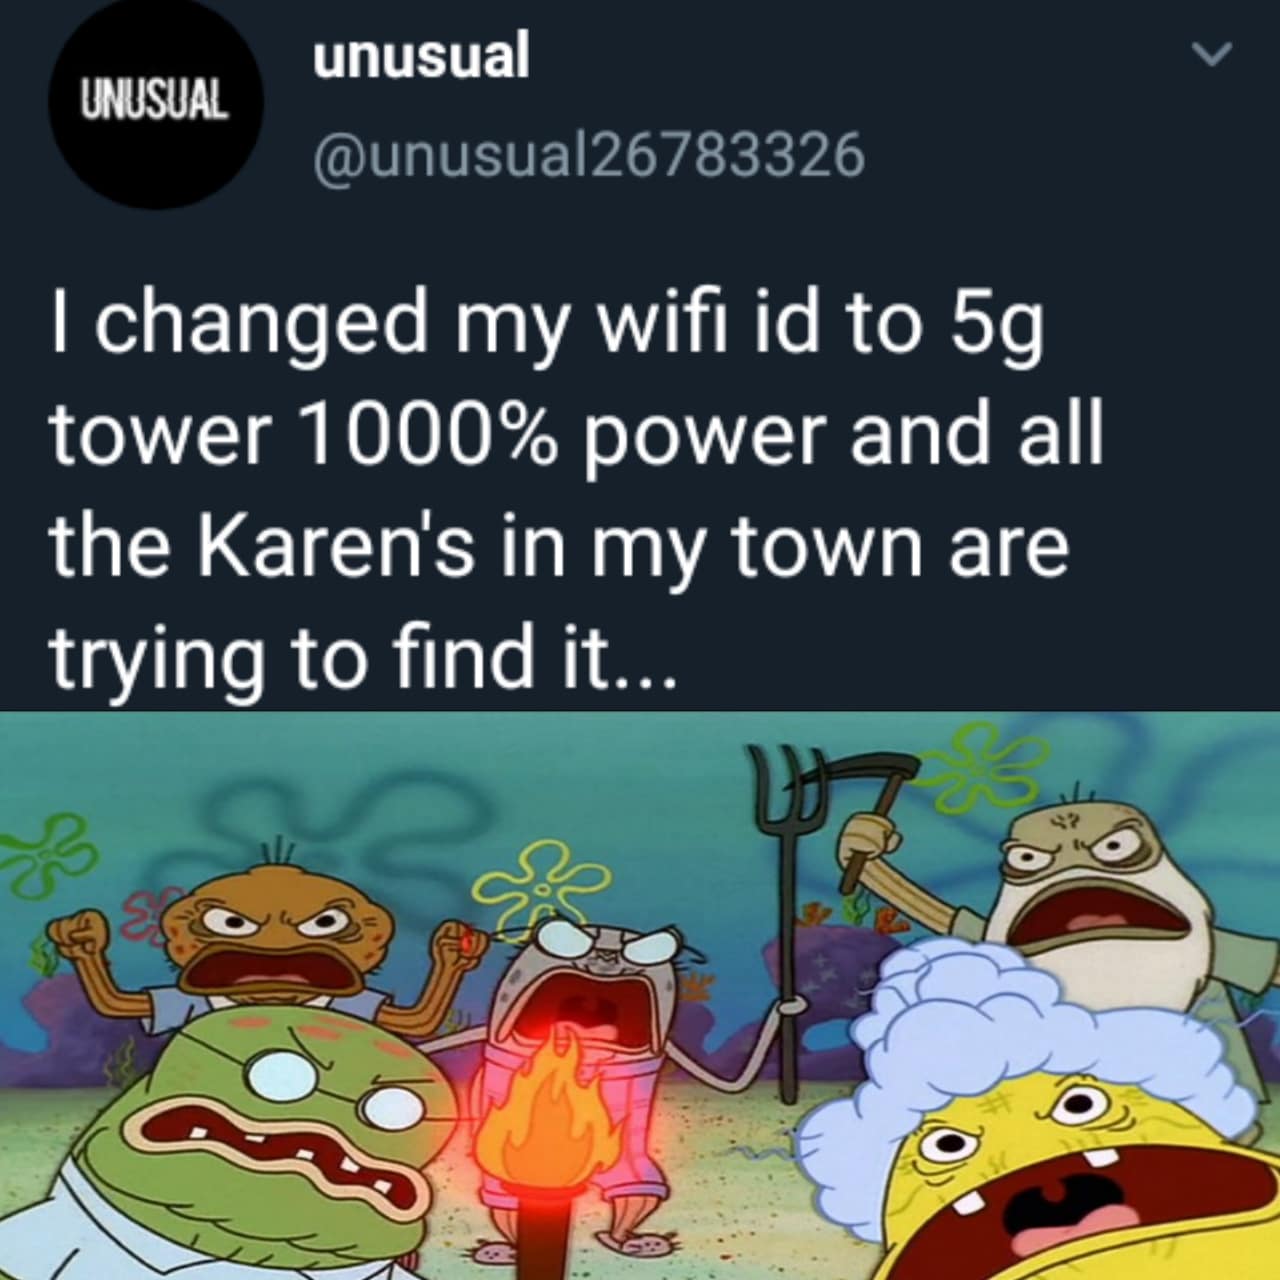 Spongebob, Karen, Ghz, WiFi, MMW, GHz Spongebob Memes Spongebob, Karen, Ghz, WiFi, MMW, GHz text: unusual @unusua126783326 I changed my wifi id to 5g tower 1000% power and all the Karen's in my town are trying to find it... 